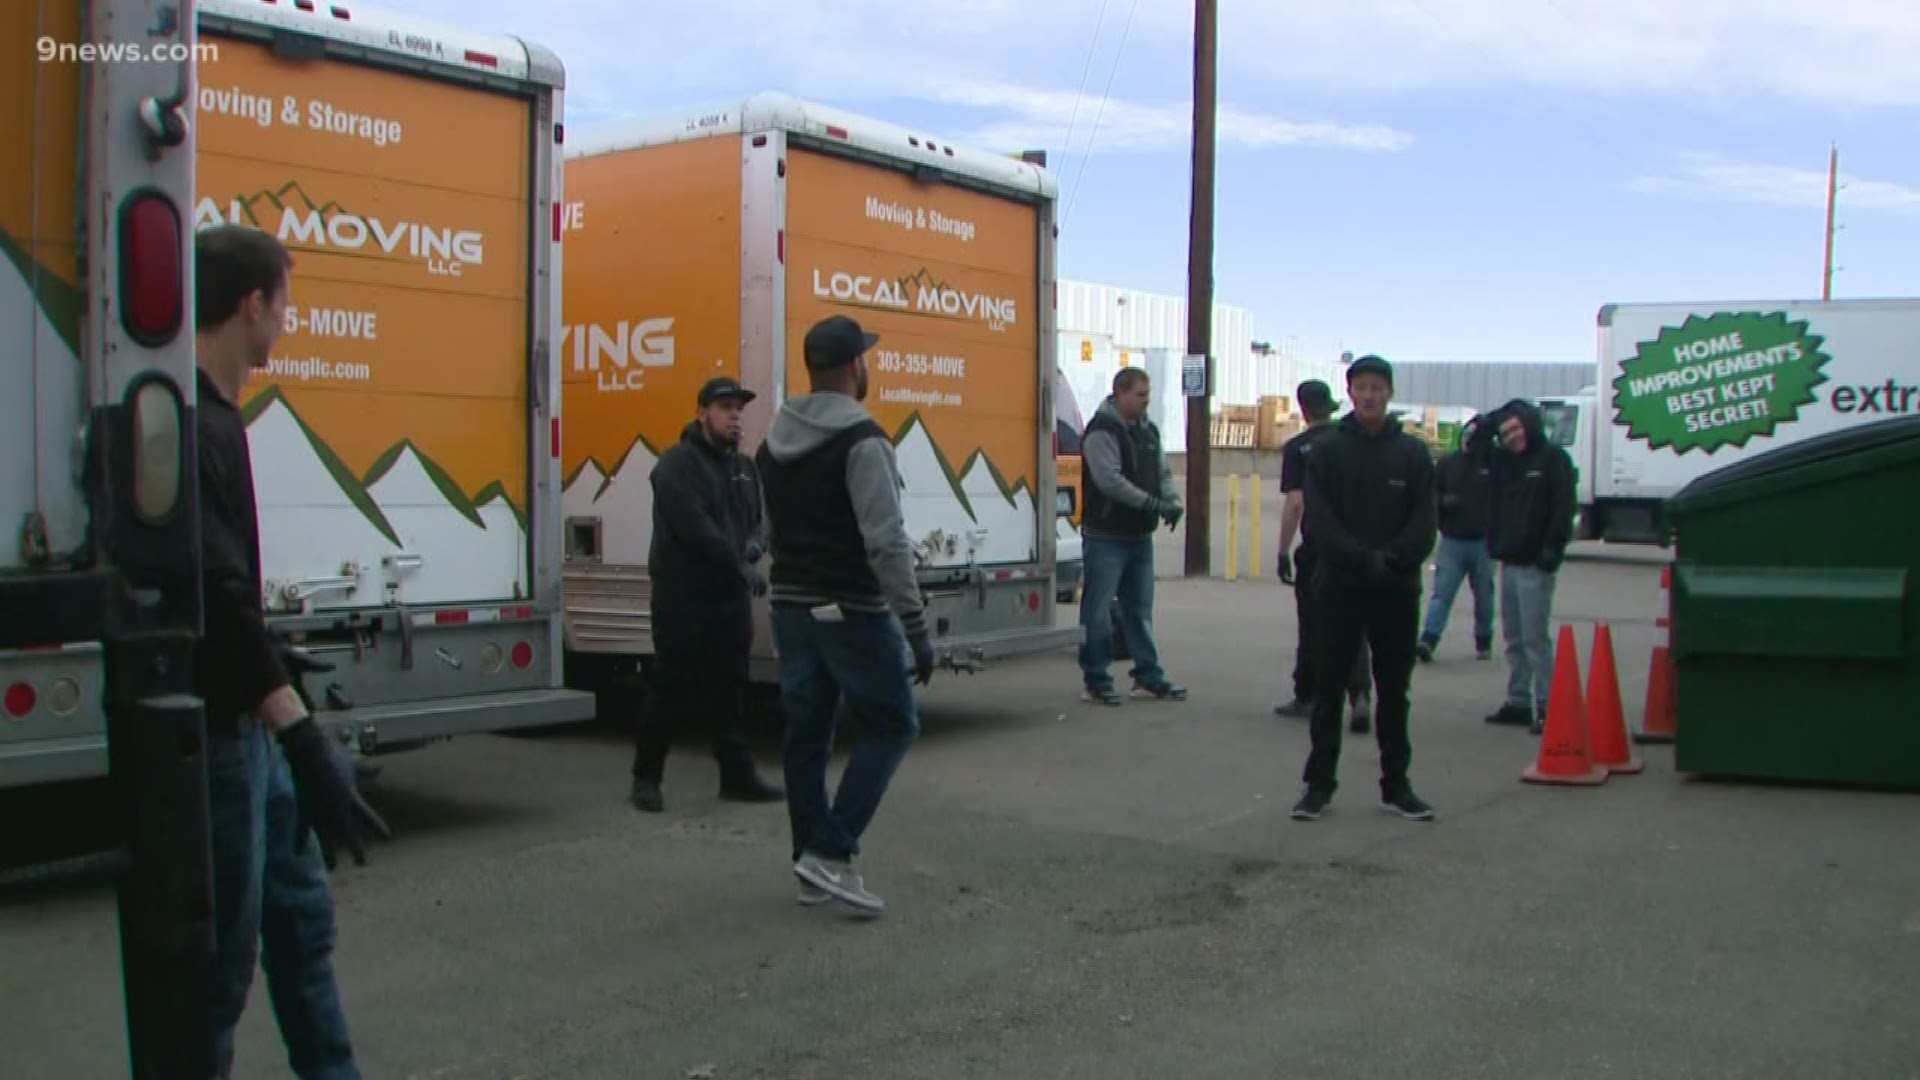 Local Moving LLC is prioritizing moves that cannot wait and is taking steps to keep workers and customers safe amid the COVID-19 outbreak in Colorado.